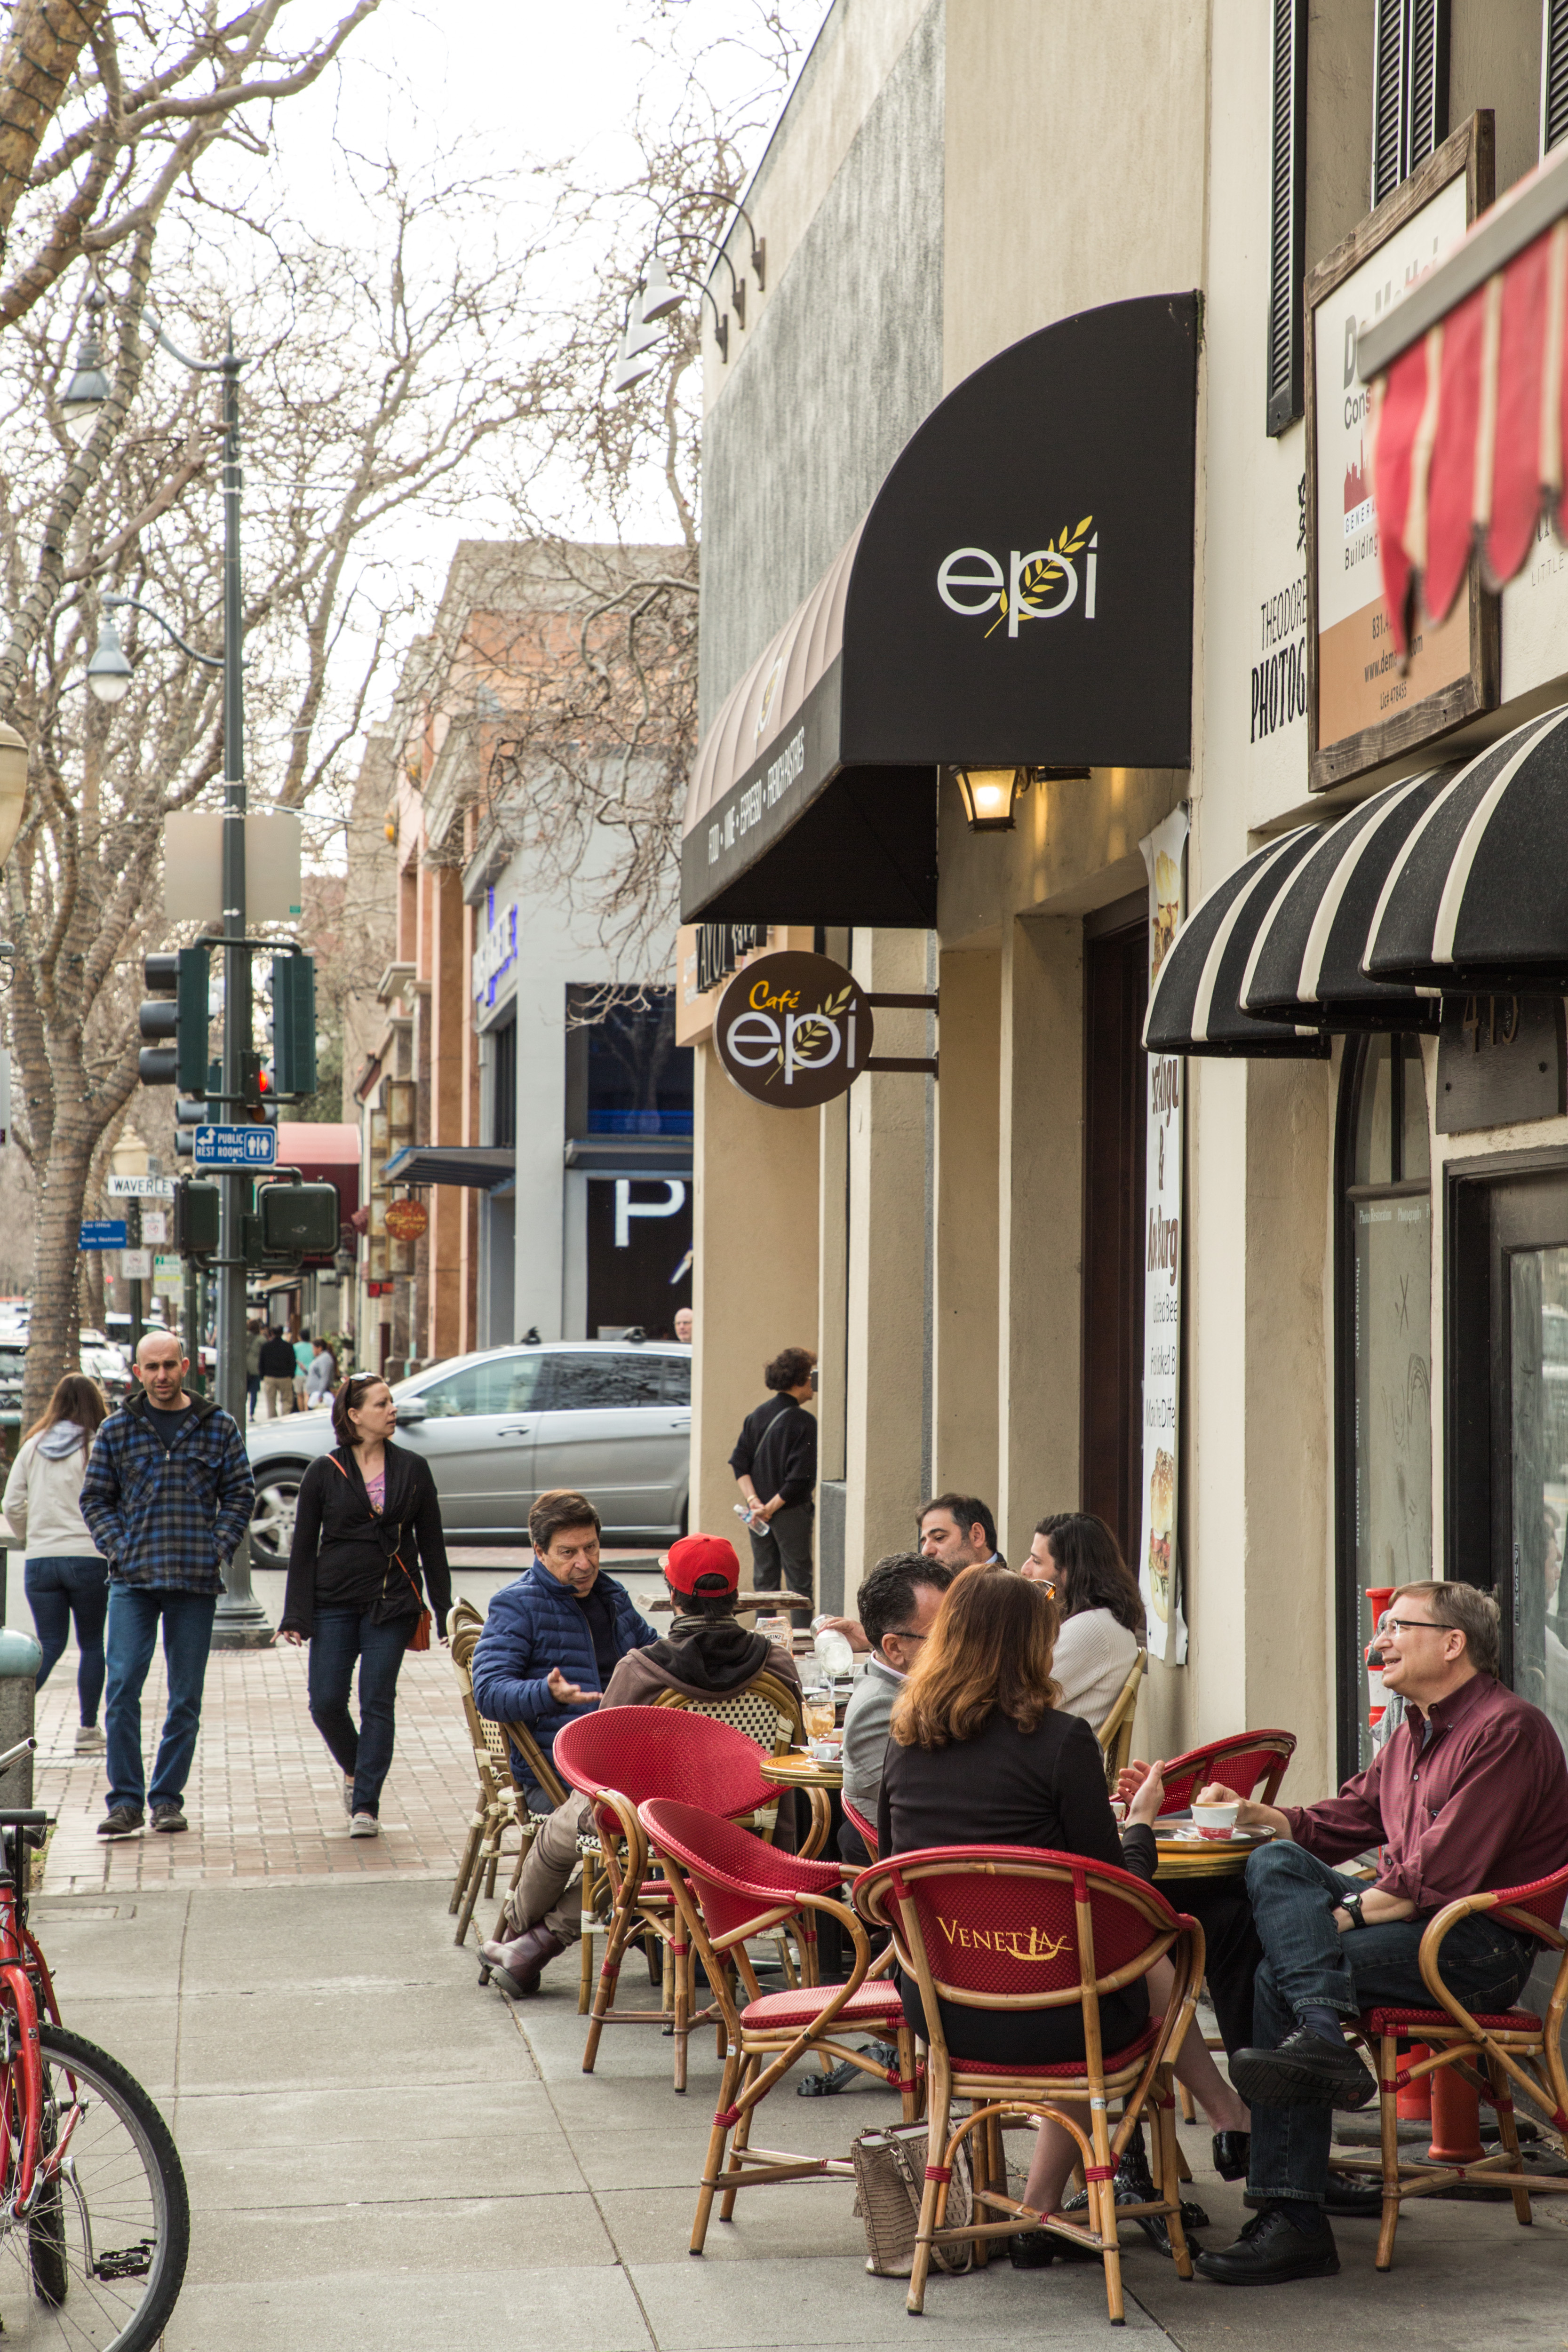 The retail economy is growing in Palo Alto.